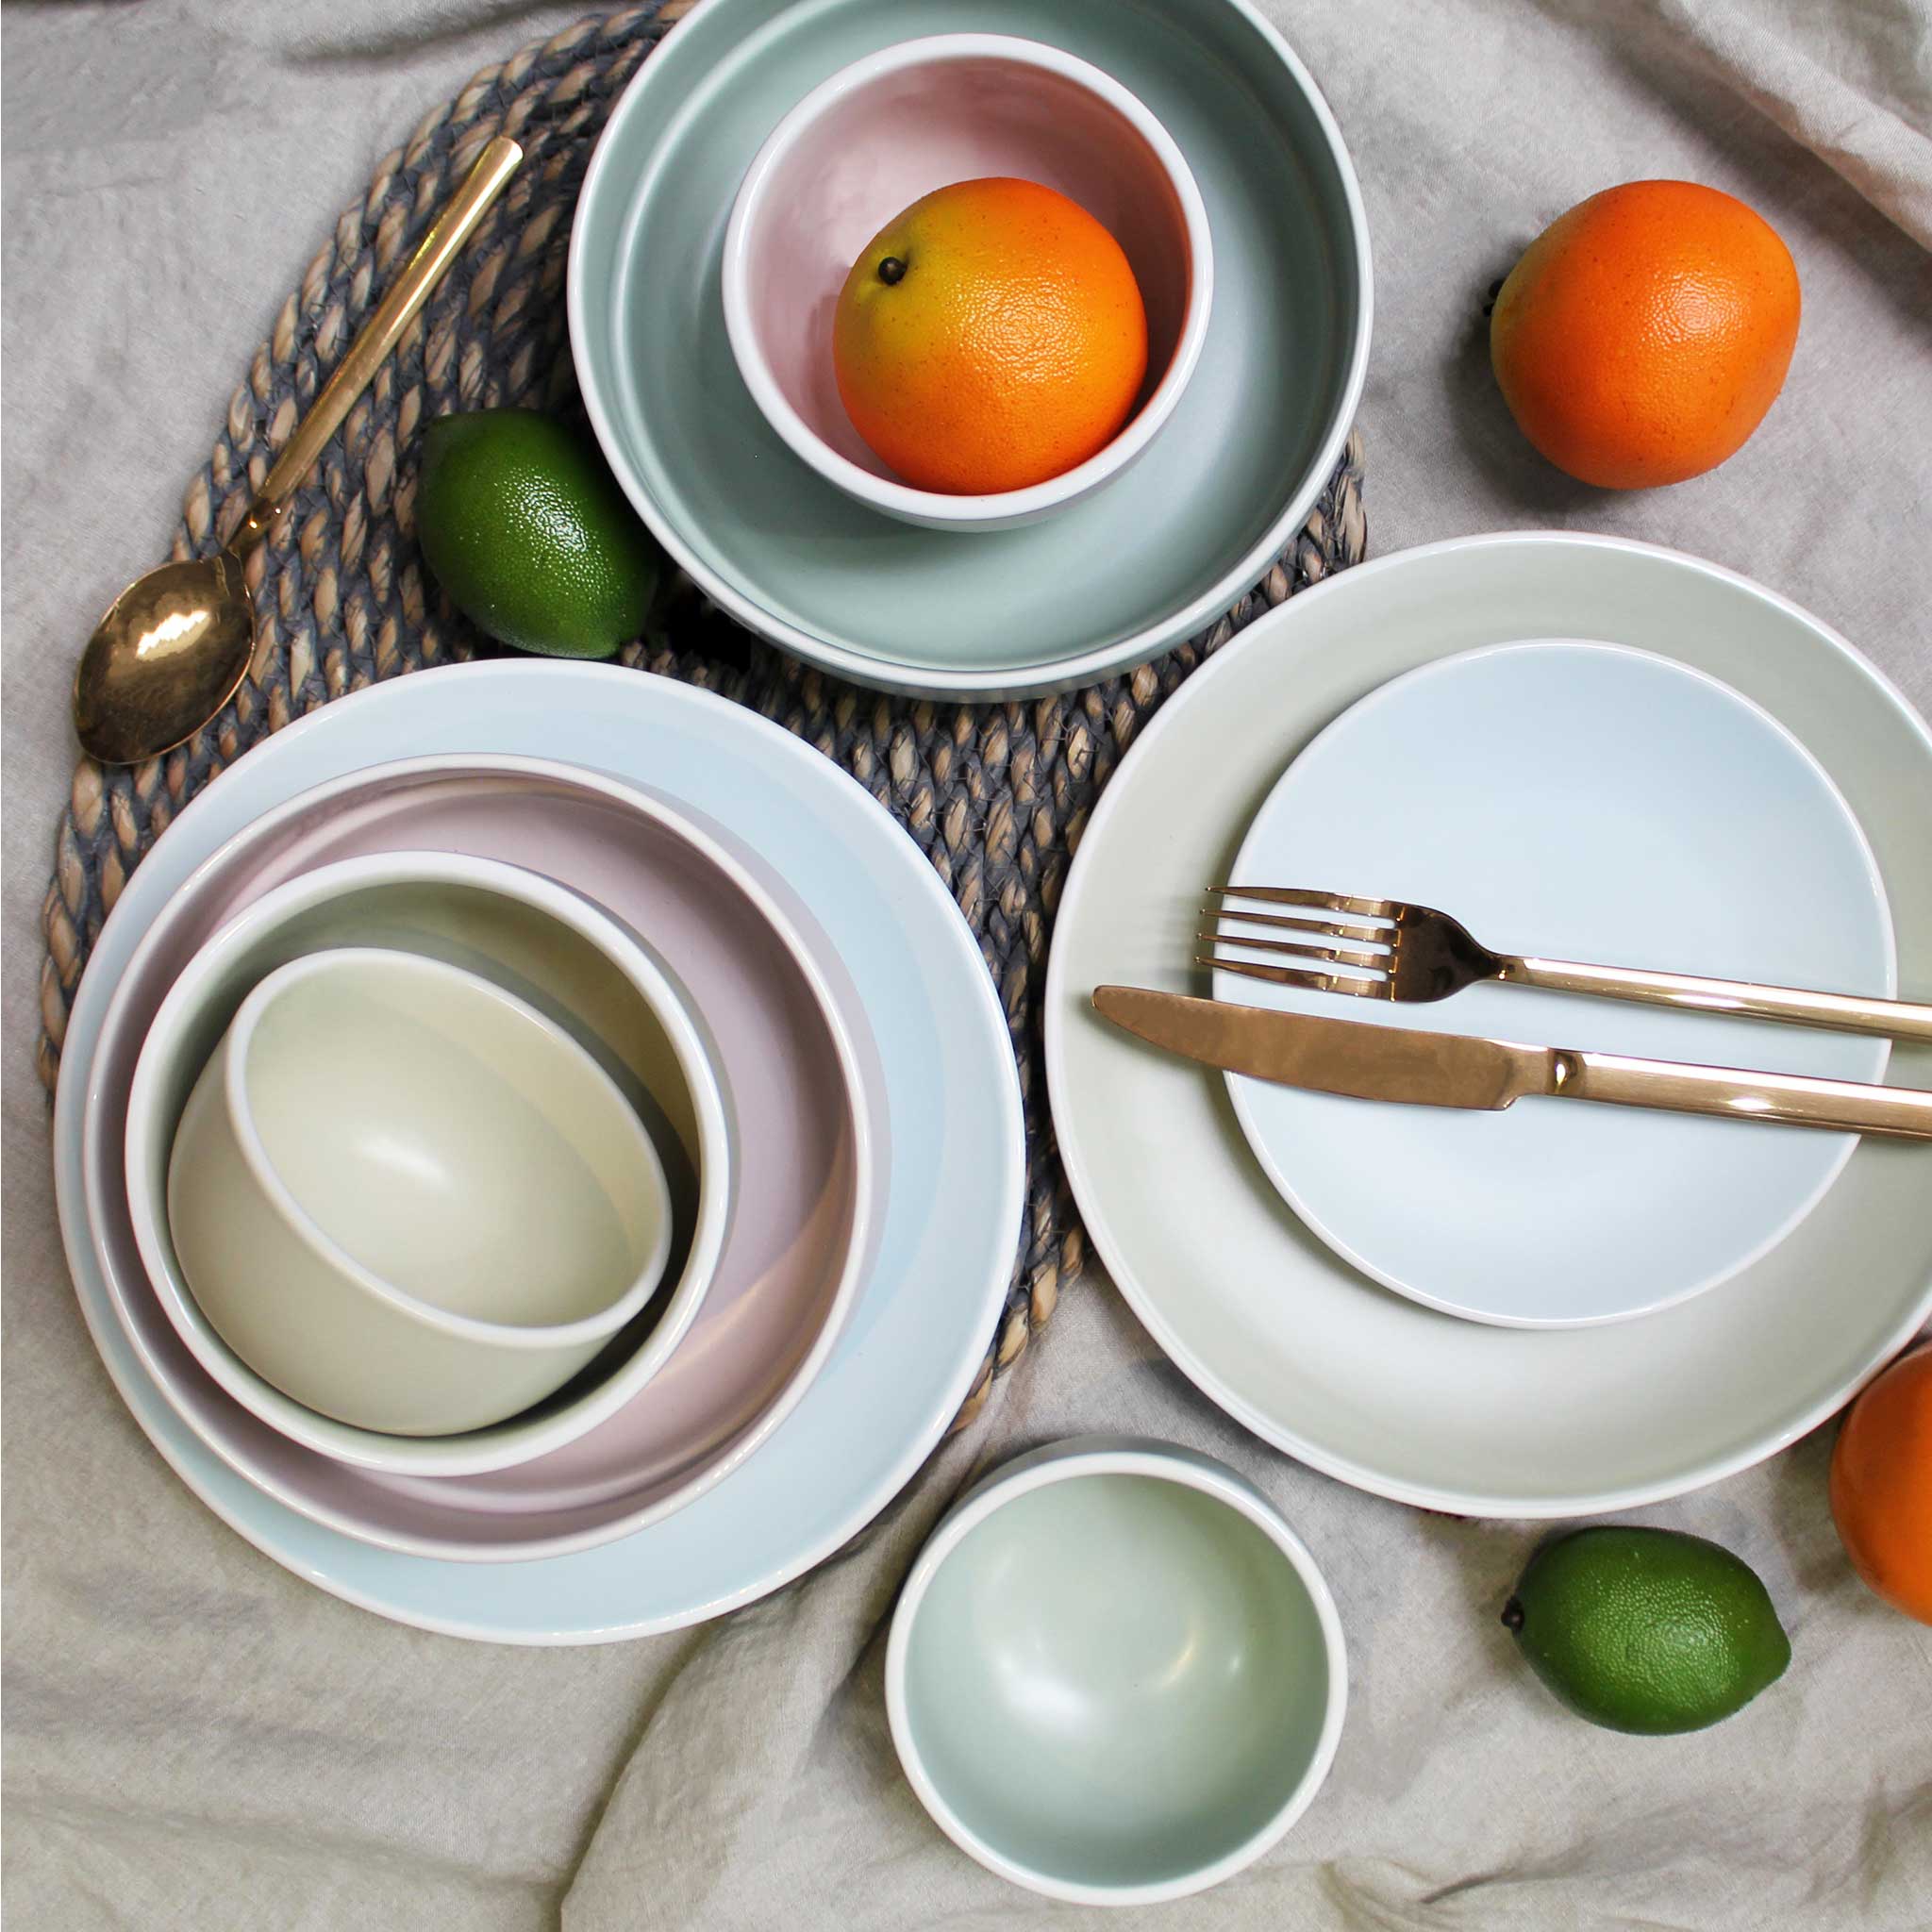 Stone dinner sets with oranges